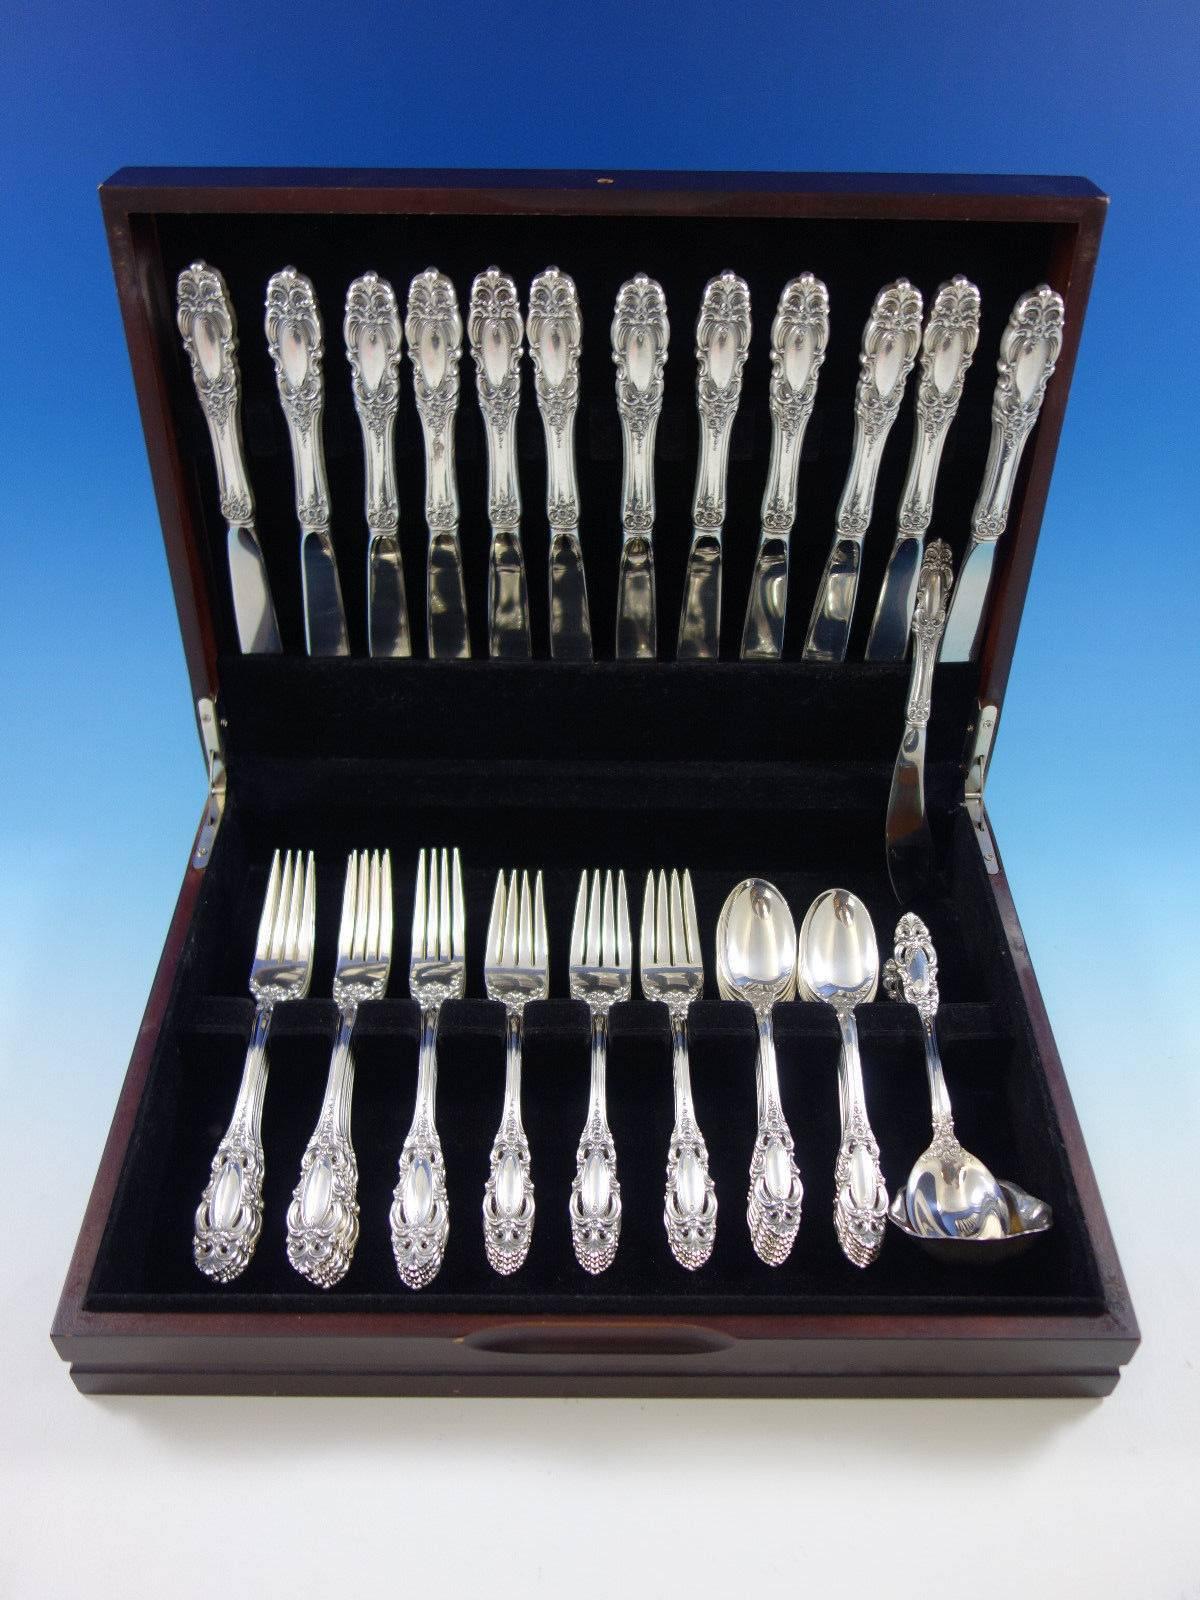 Grand Duchess by Towle sterling silver flatware set of 51 pieces. This set includes: 

12 knives, 9 1/4